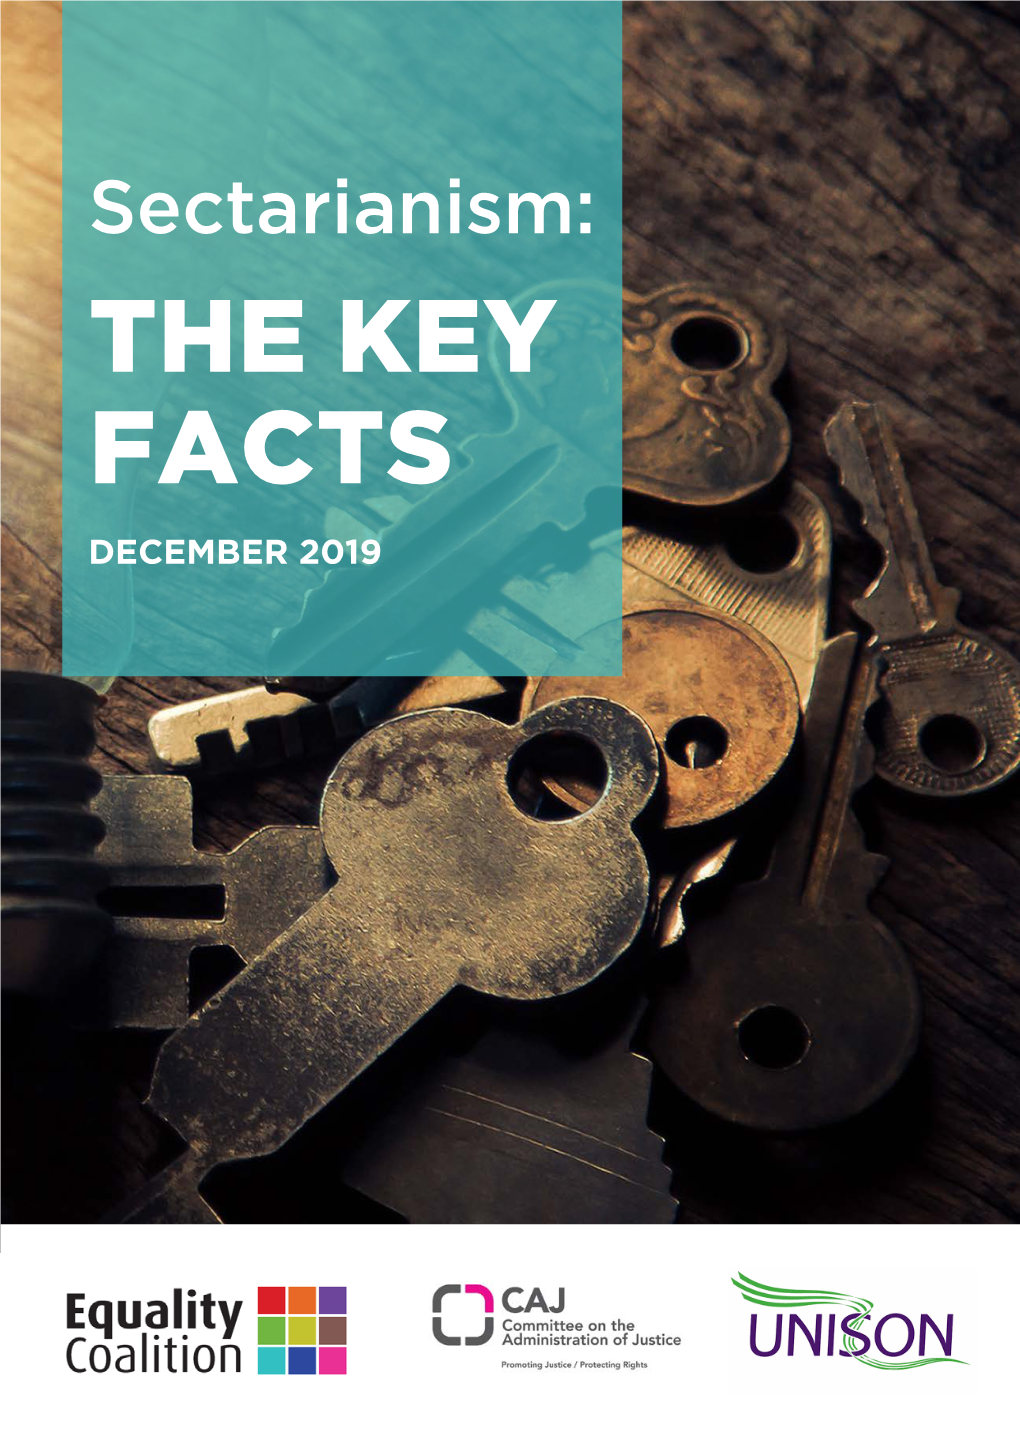 Sectarianism: the KEY FACTS DECEMBER 2019